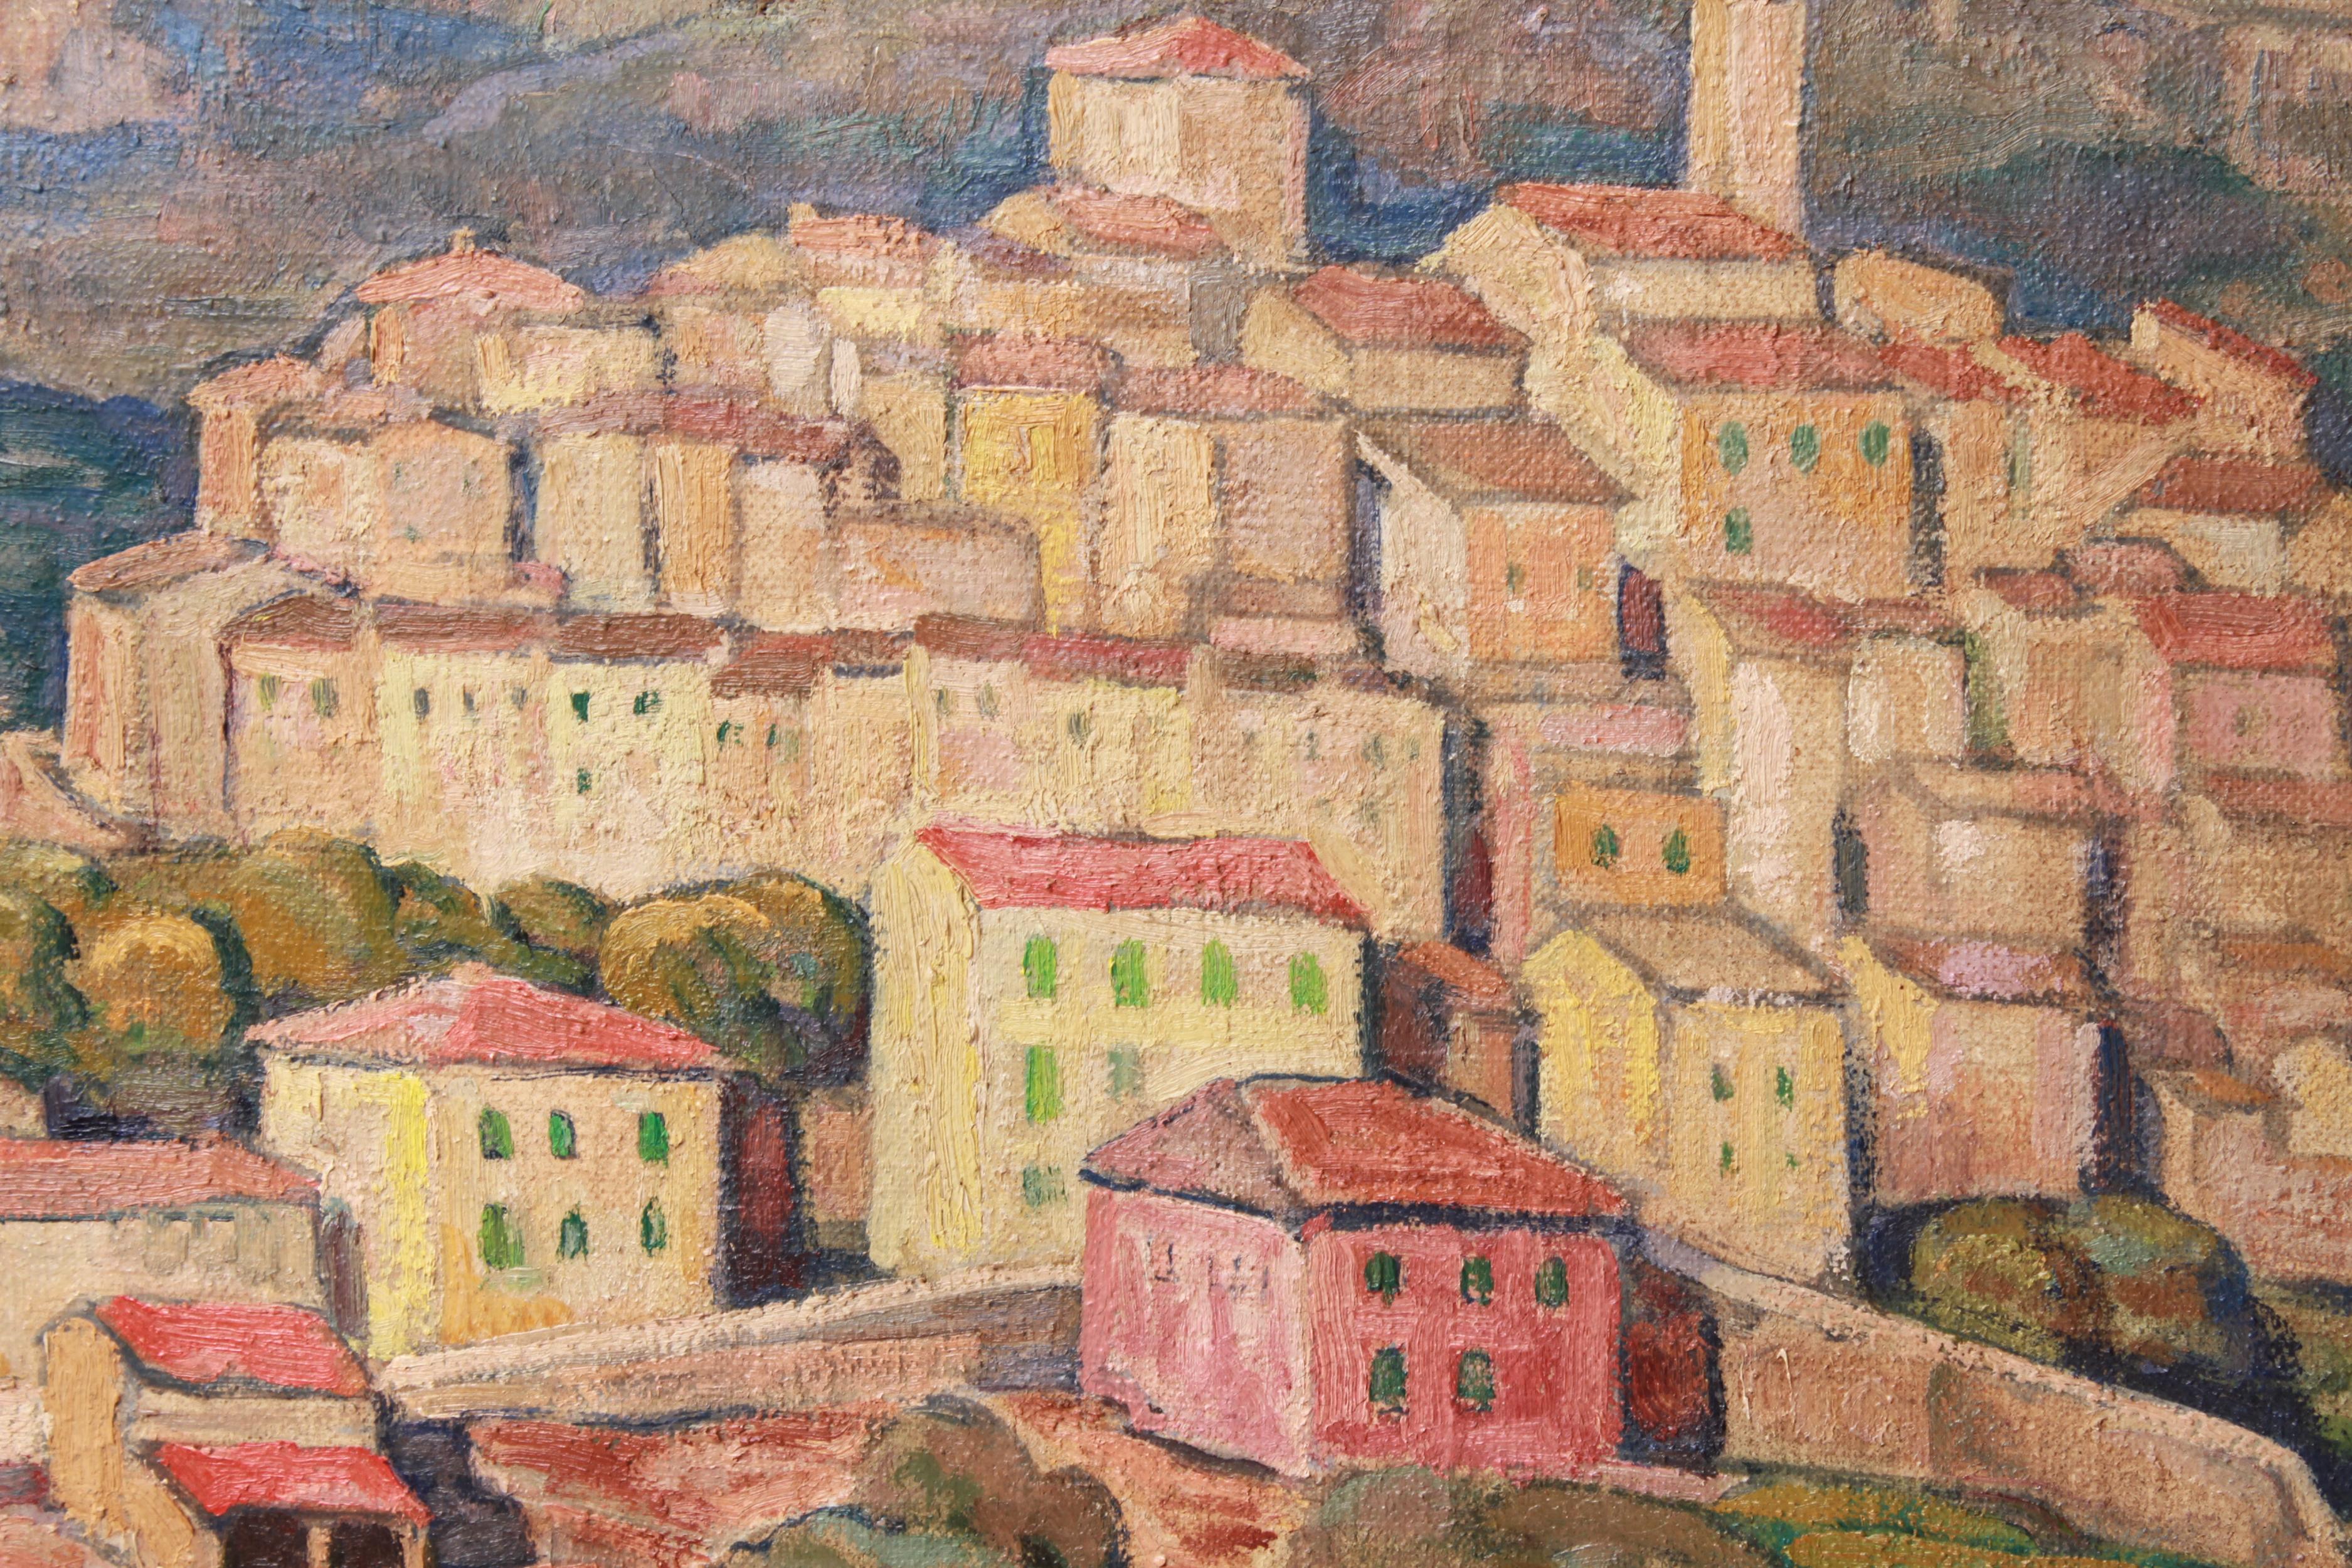 Impressionist style oil painting titled 'Gattières' (France, Alpes-Maritimes), painted by George Herbert Macrum (1878-1970), depicting hillside houses, mountains and landscape. The piece is signed in the lower center right 